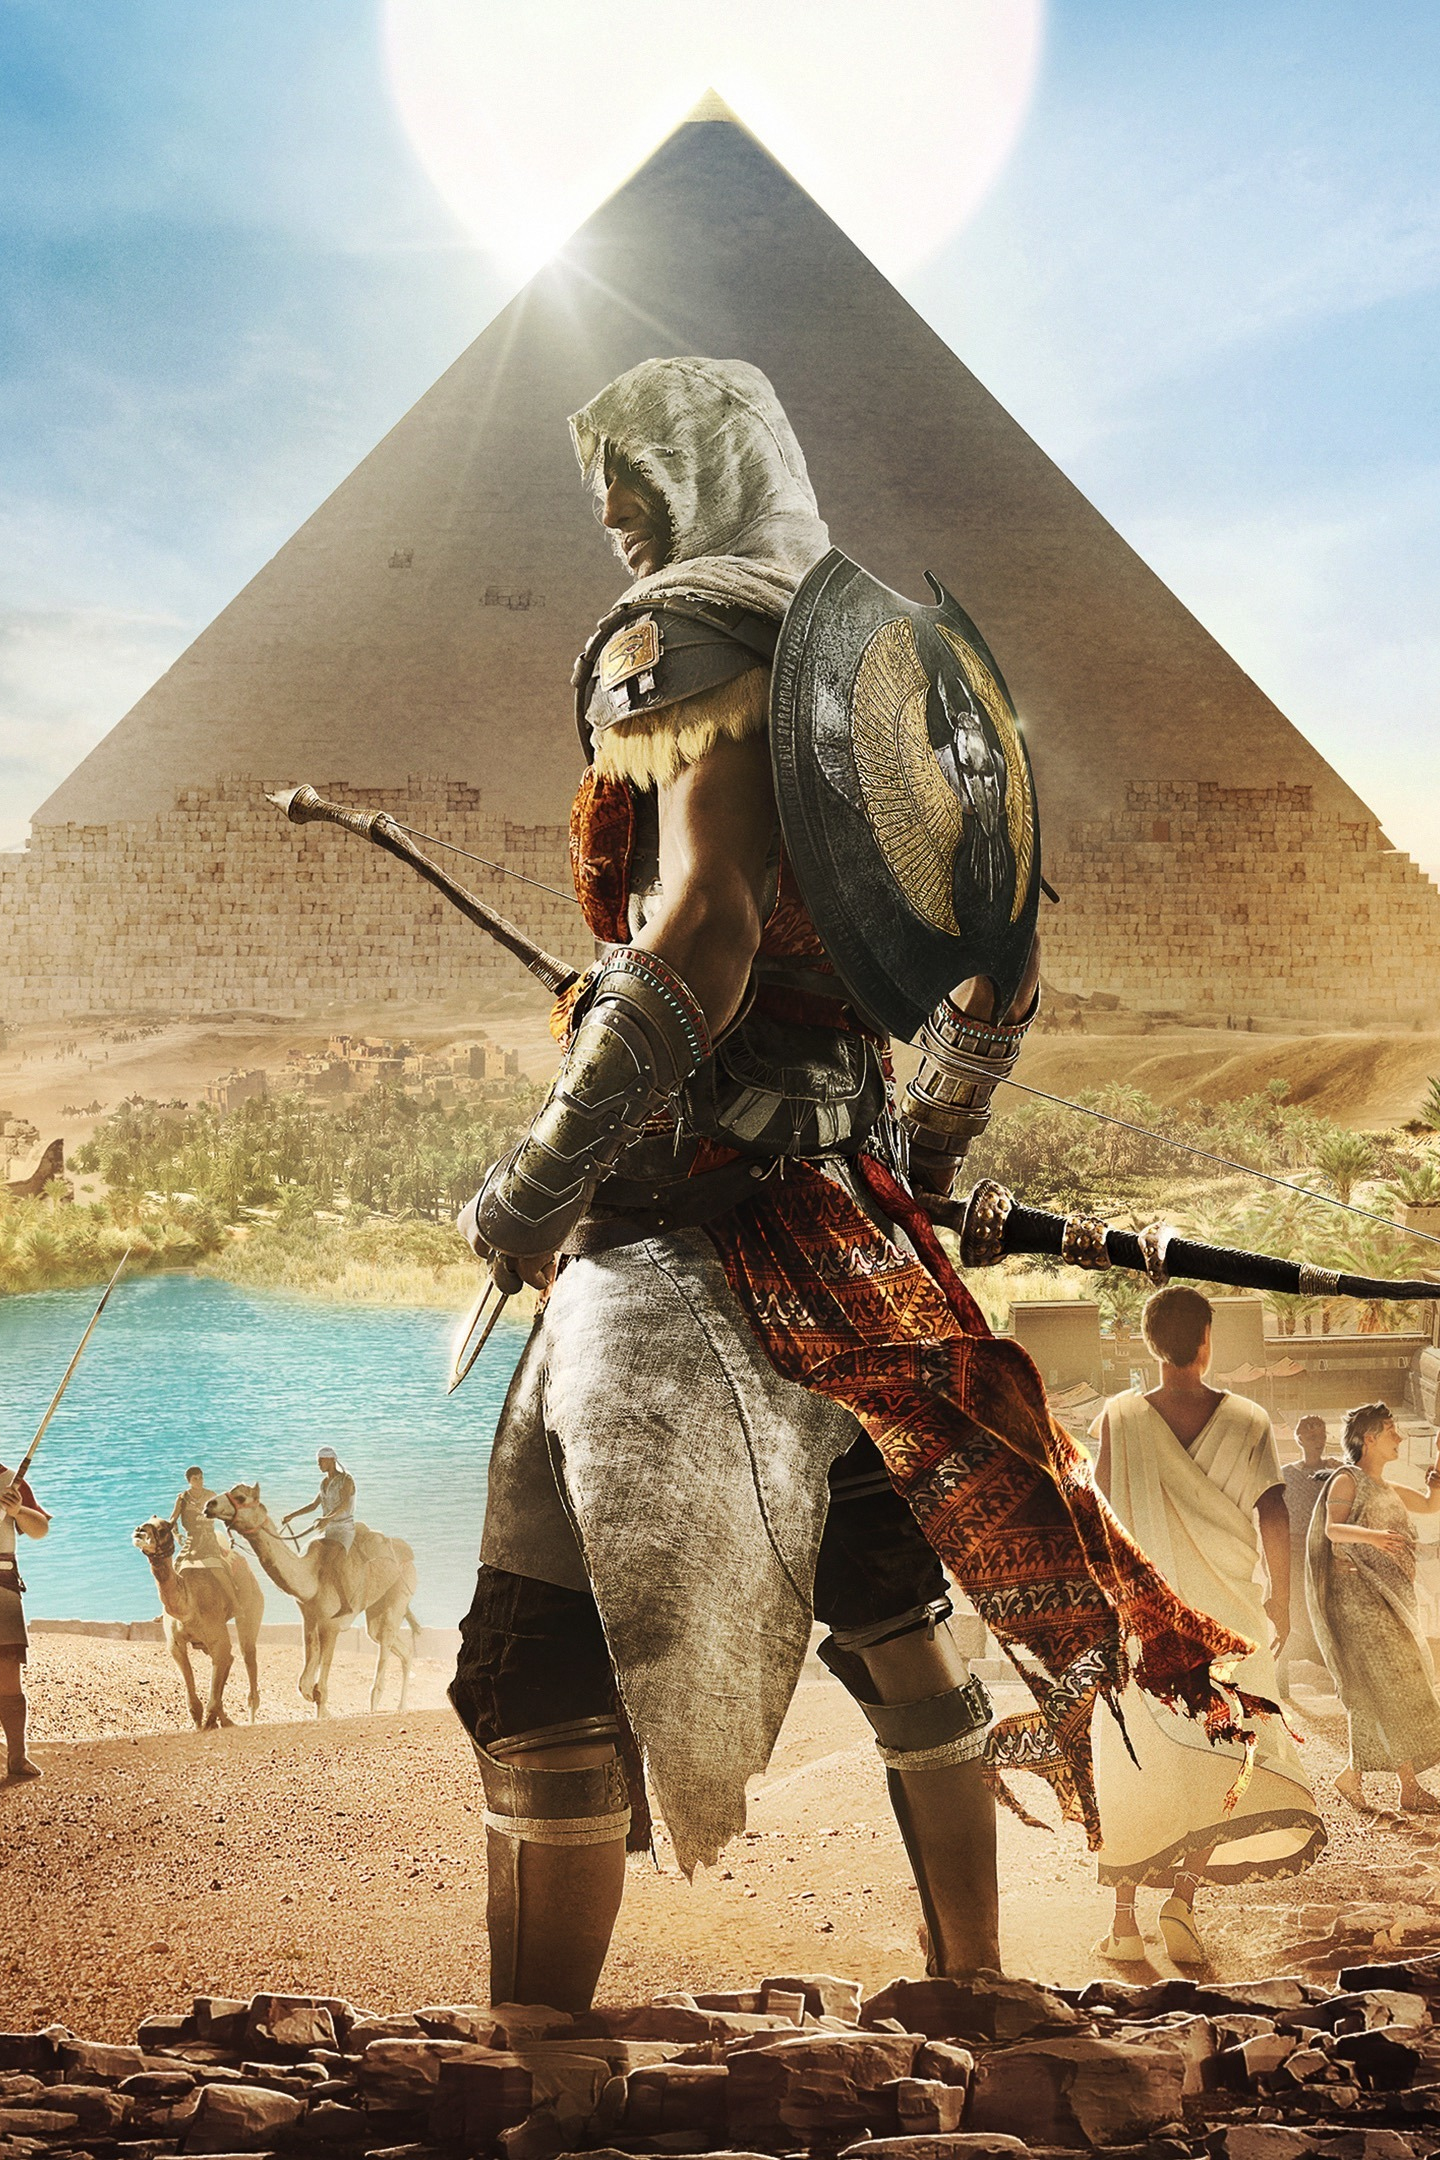 Download wallpaper 1440x2560 assassin's creed: origins, egypt, pyramids,  video game, qhd samsung galaxy s6, s7, edge, note, lg g4, 1440x2560 hd  background, 2296